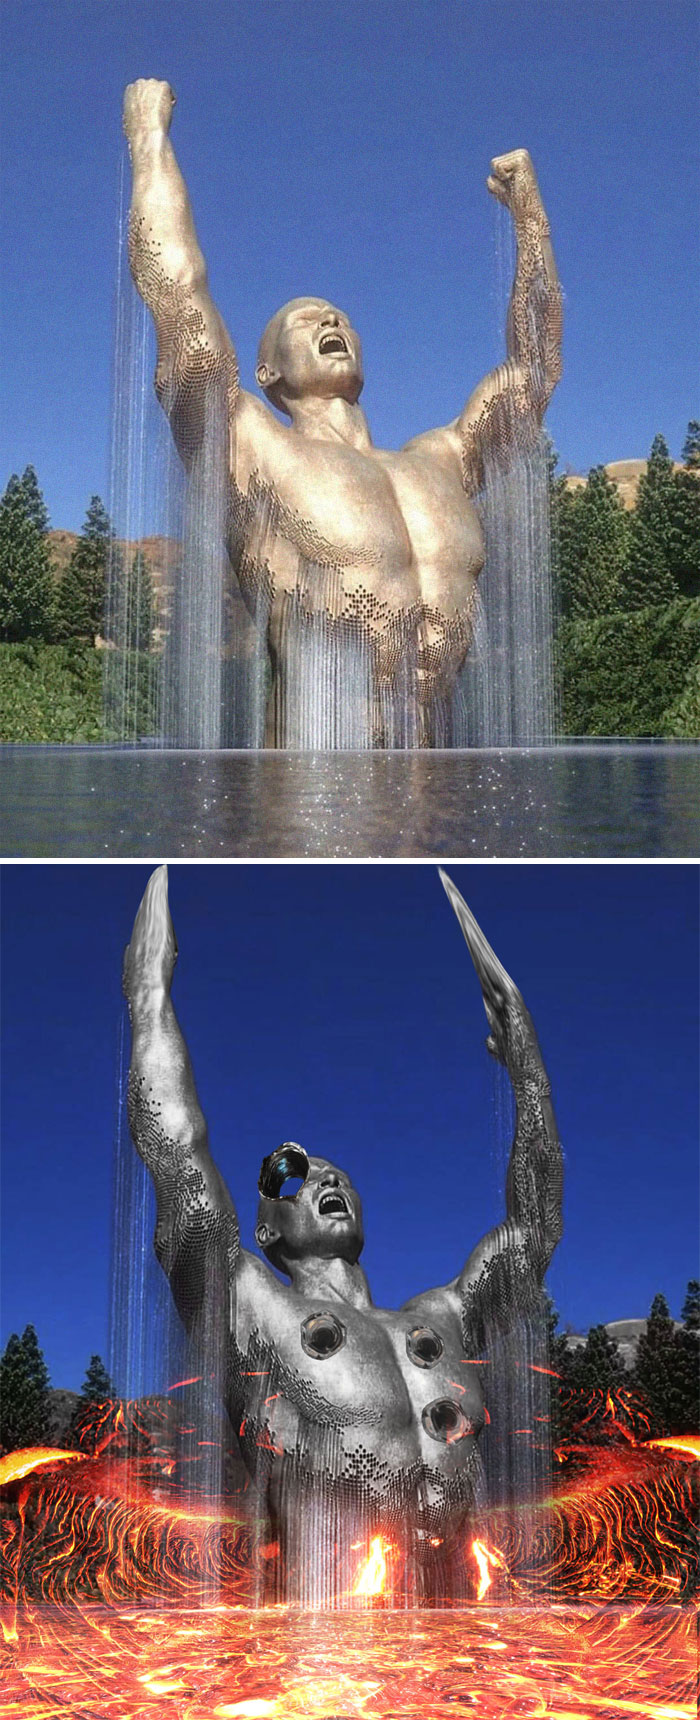 The Golden Statue Rising From The Water